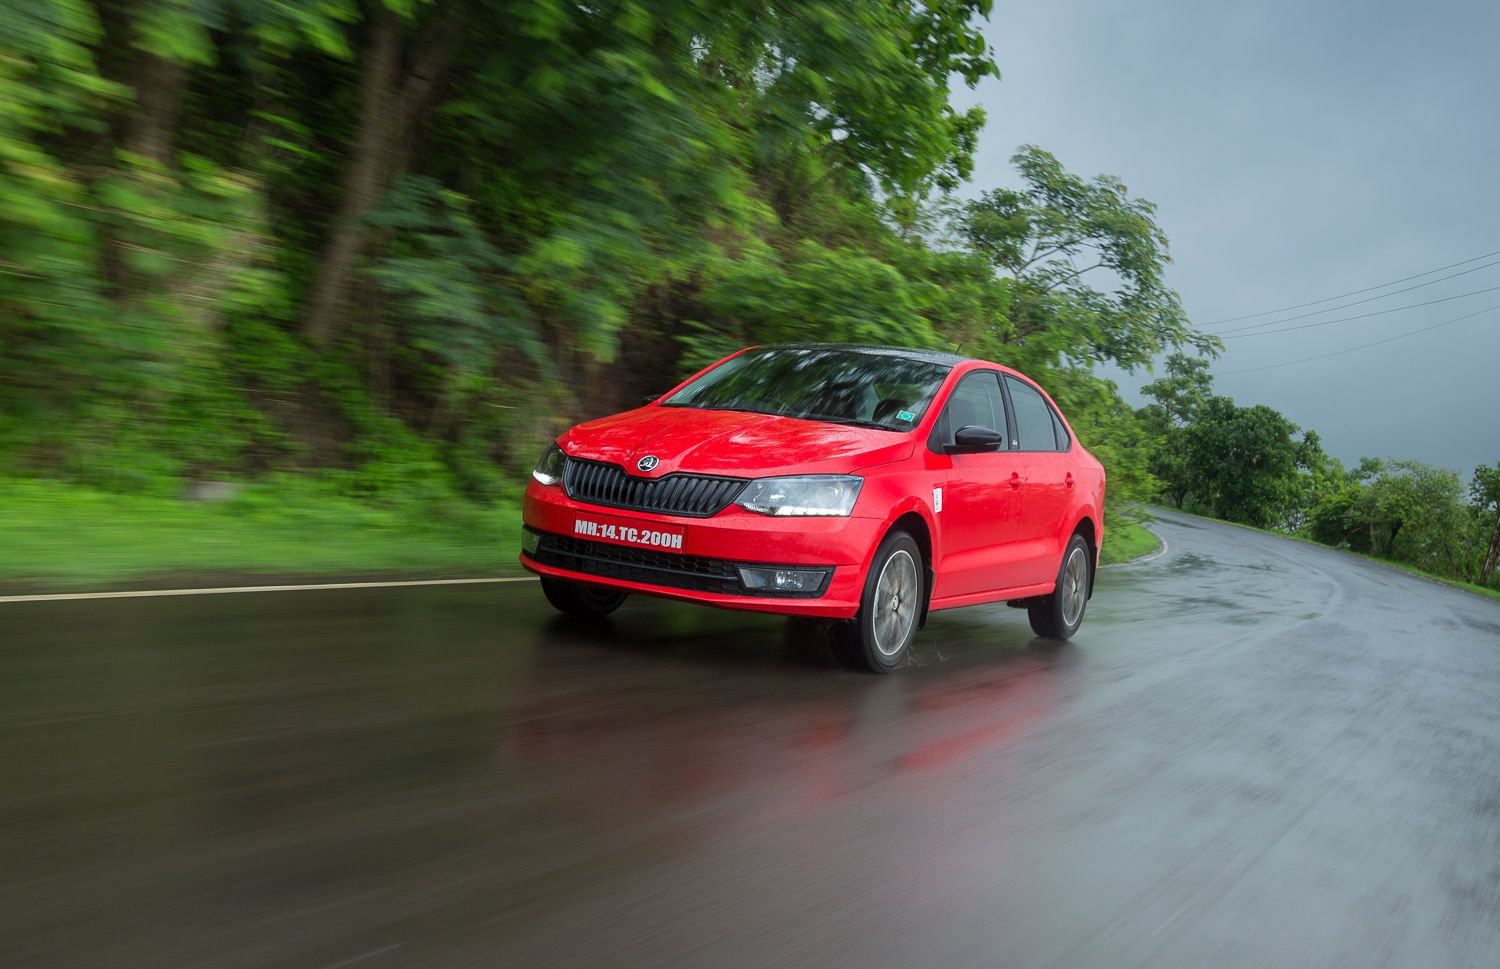 8 Skoda Rapid Road Test Reviews from Experts